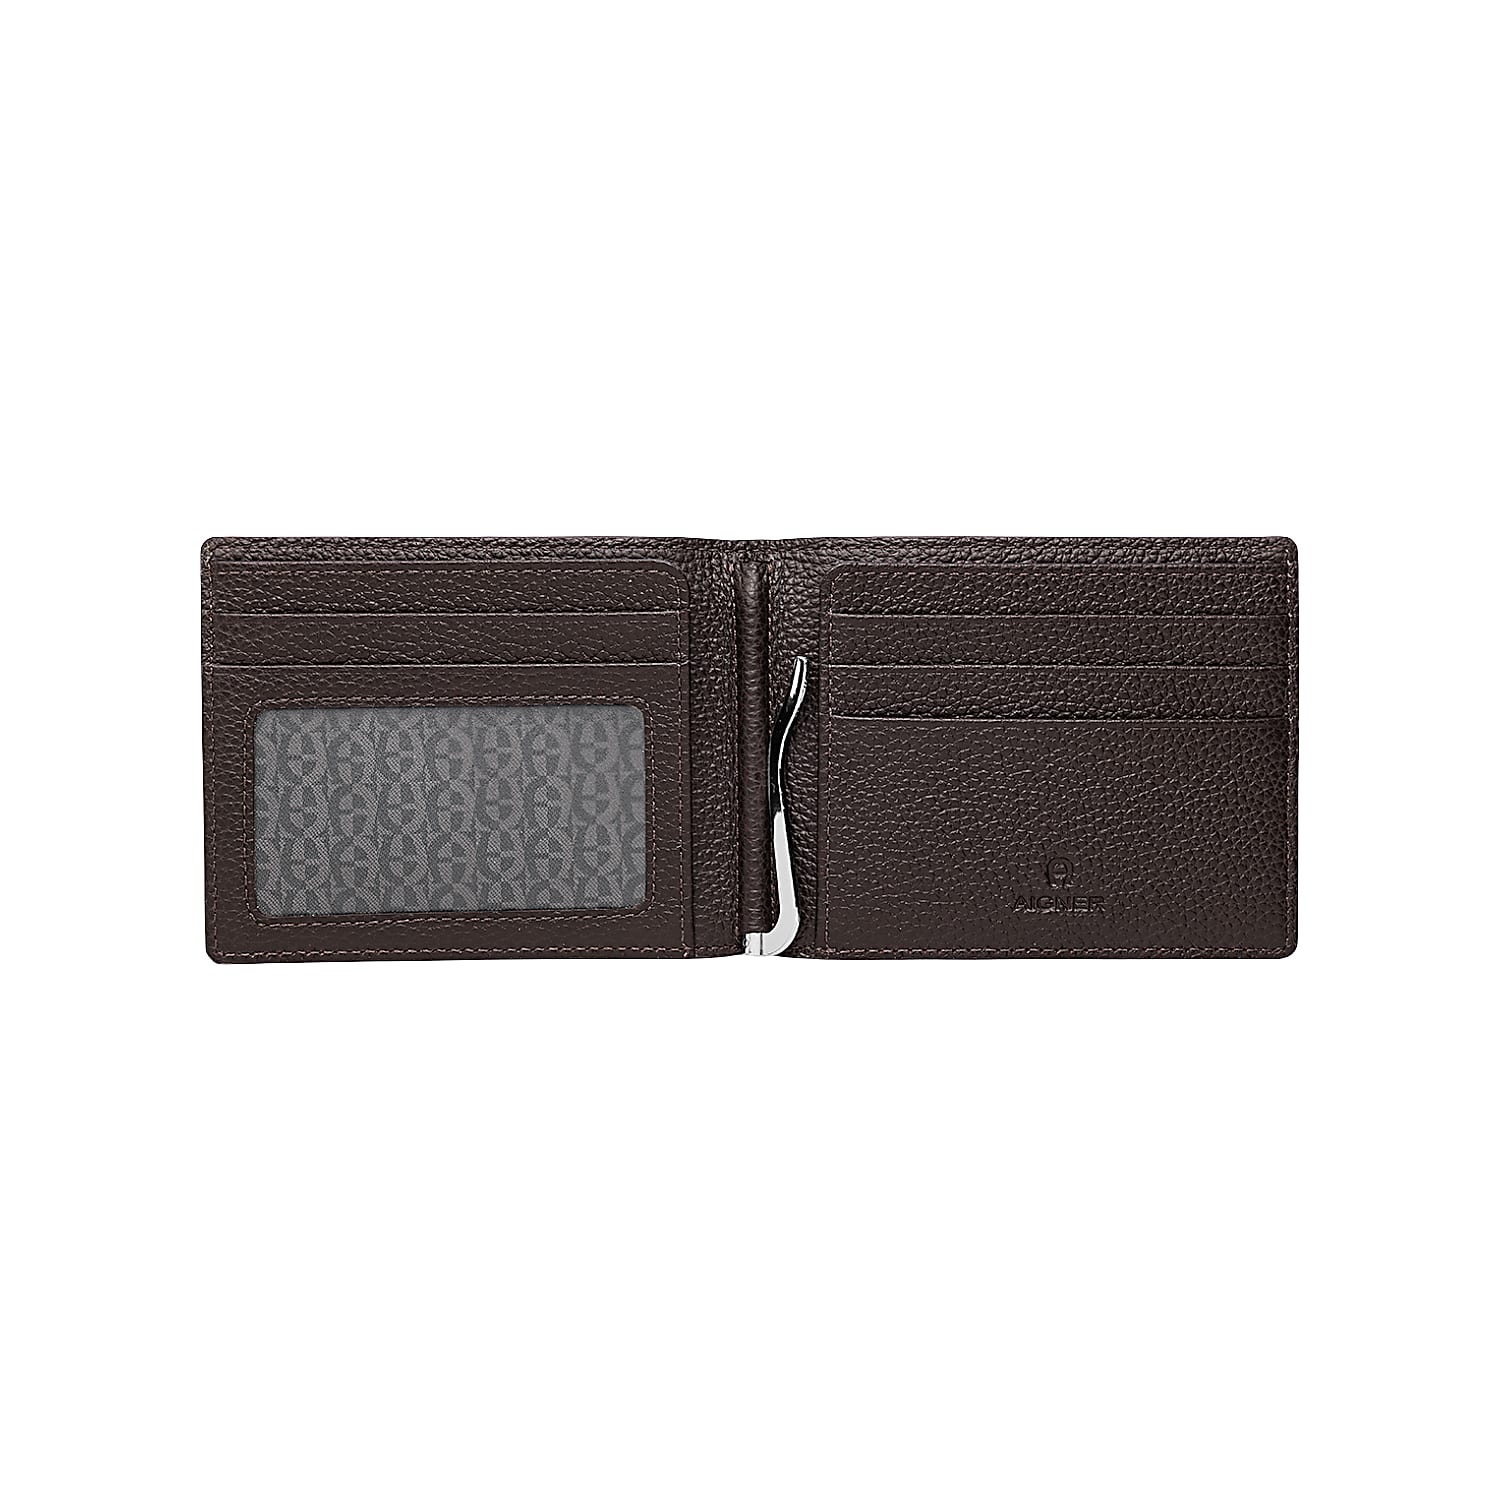 Titus wallet with money clip